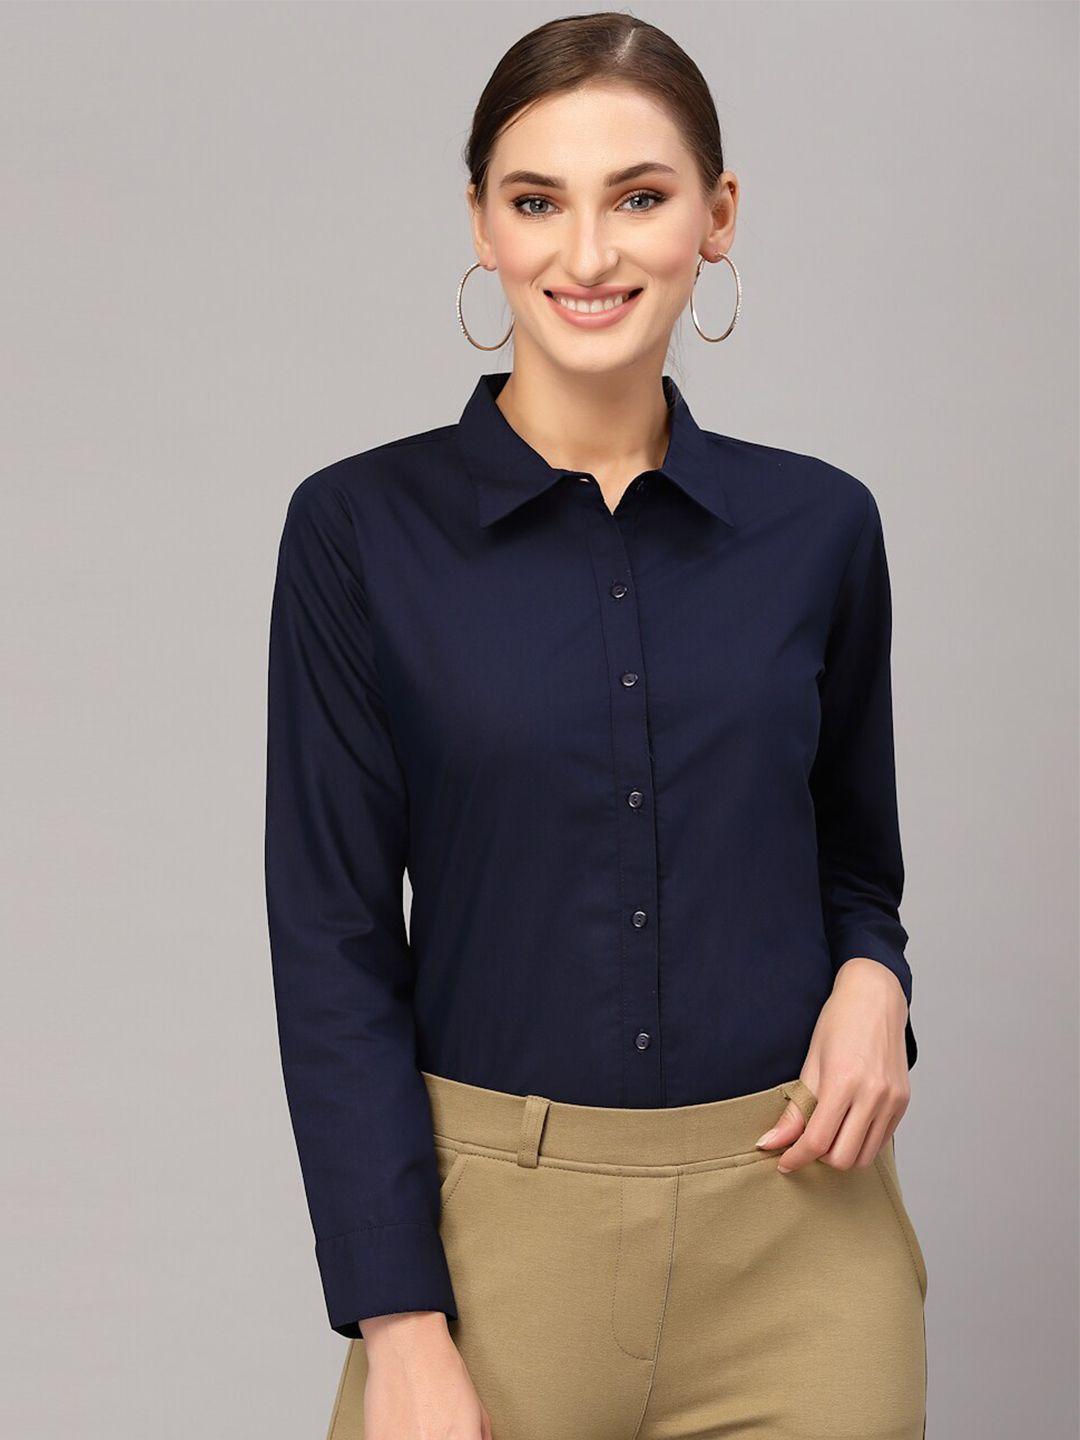 style-quotient-women-navy-blue-formal-shirt